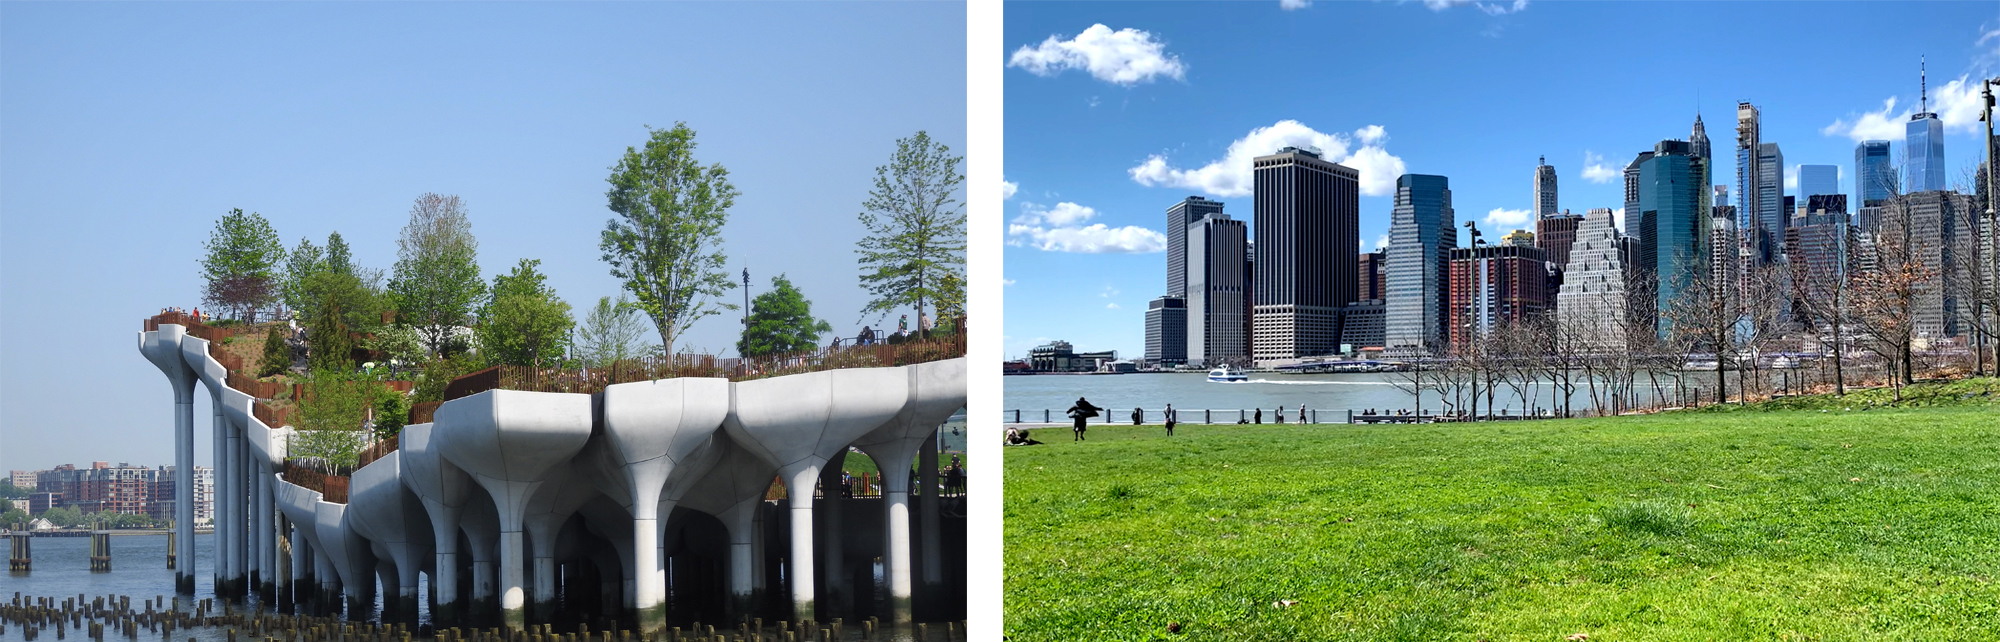 Left: Little Island park, a unique design on stilts above the water; Right: The southern Manhattan skyline across the river from a green park